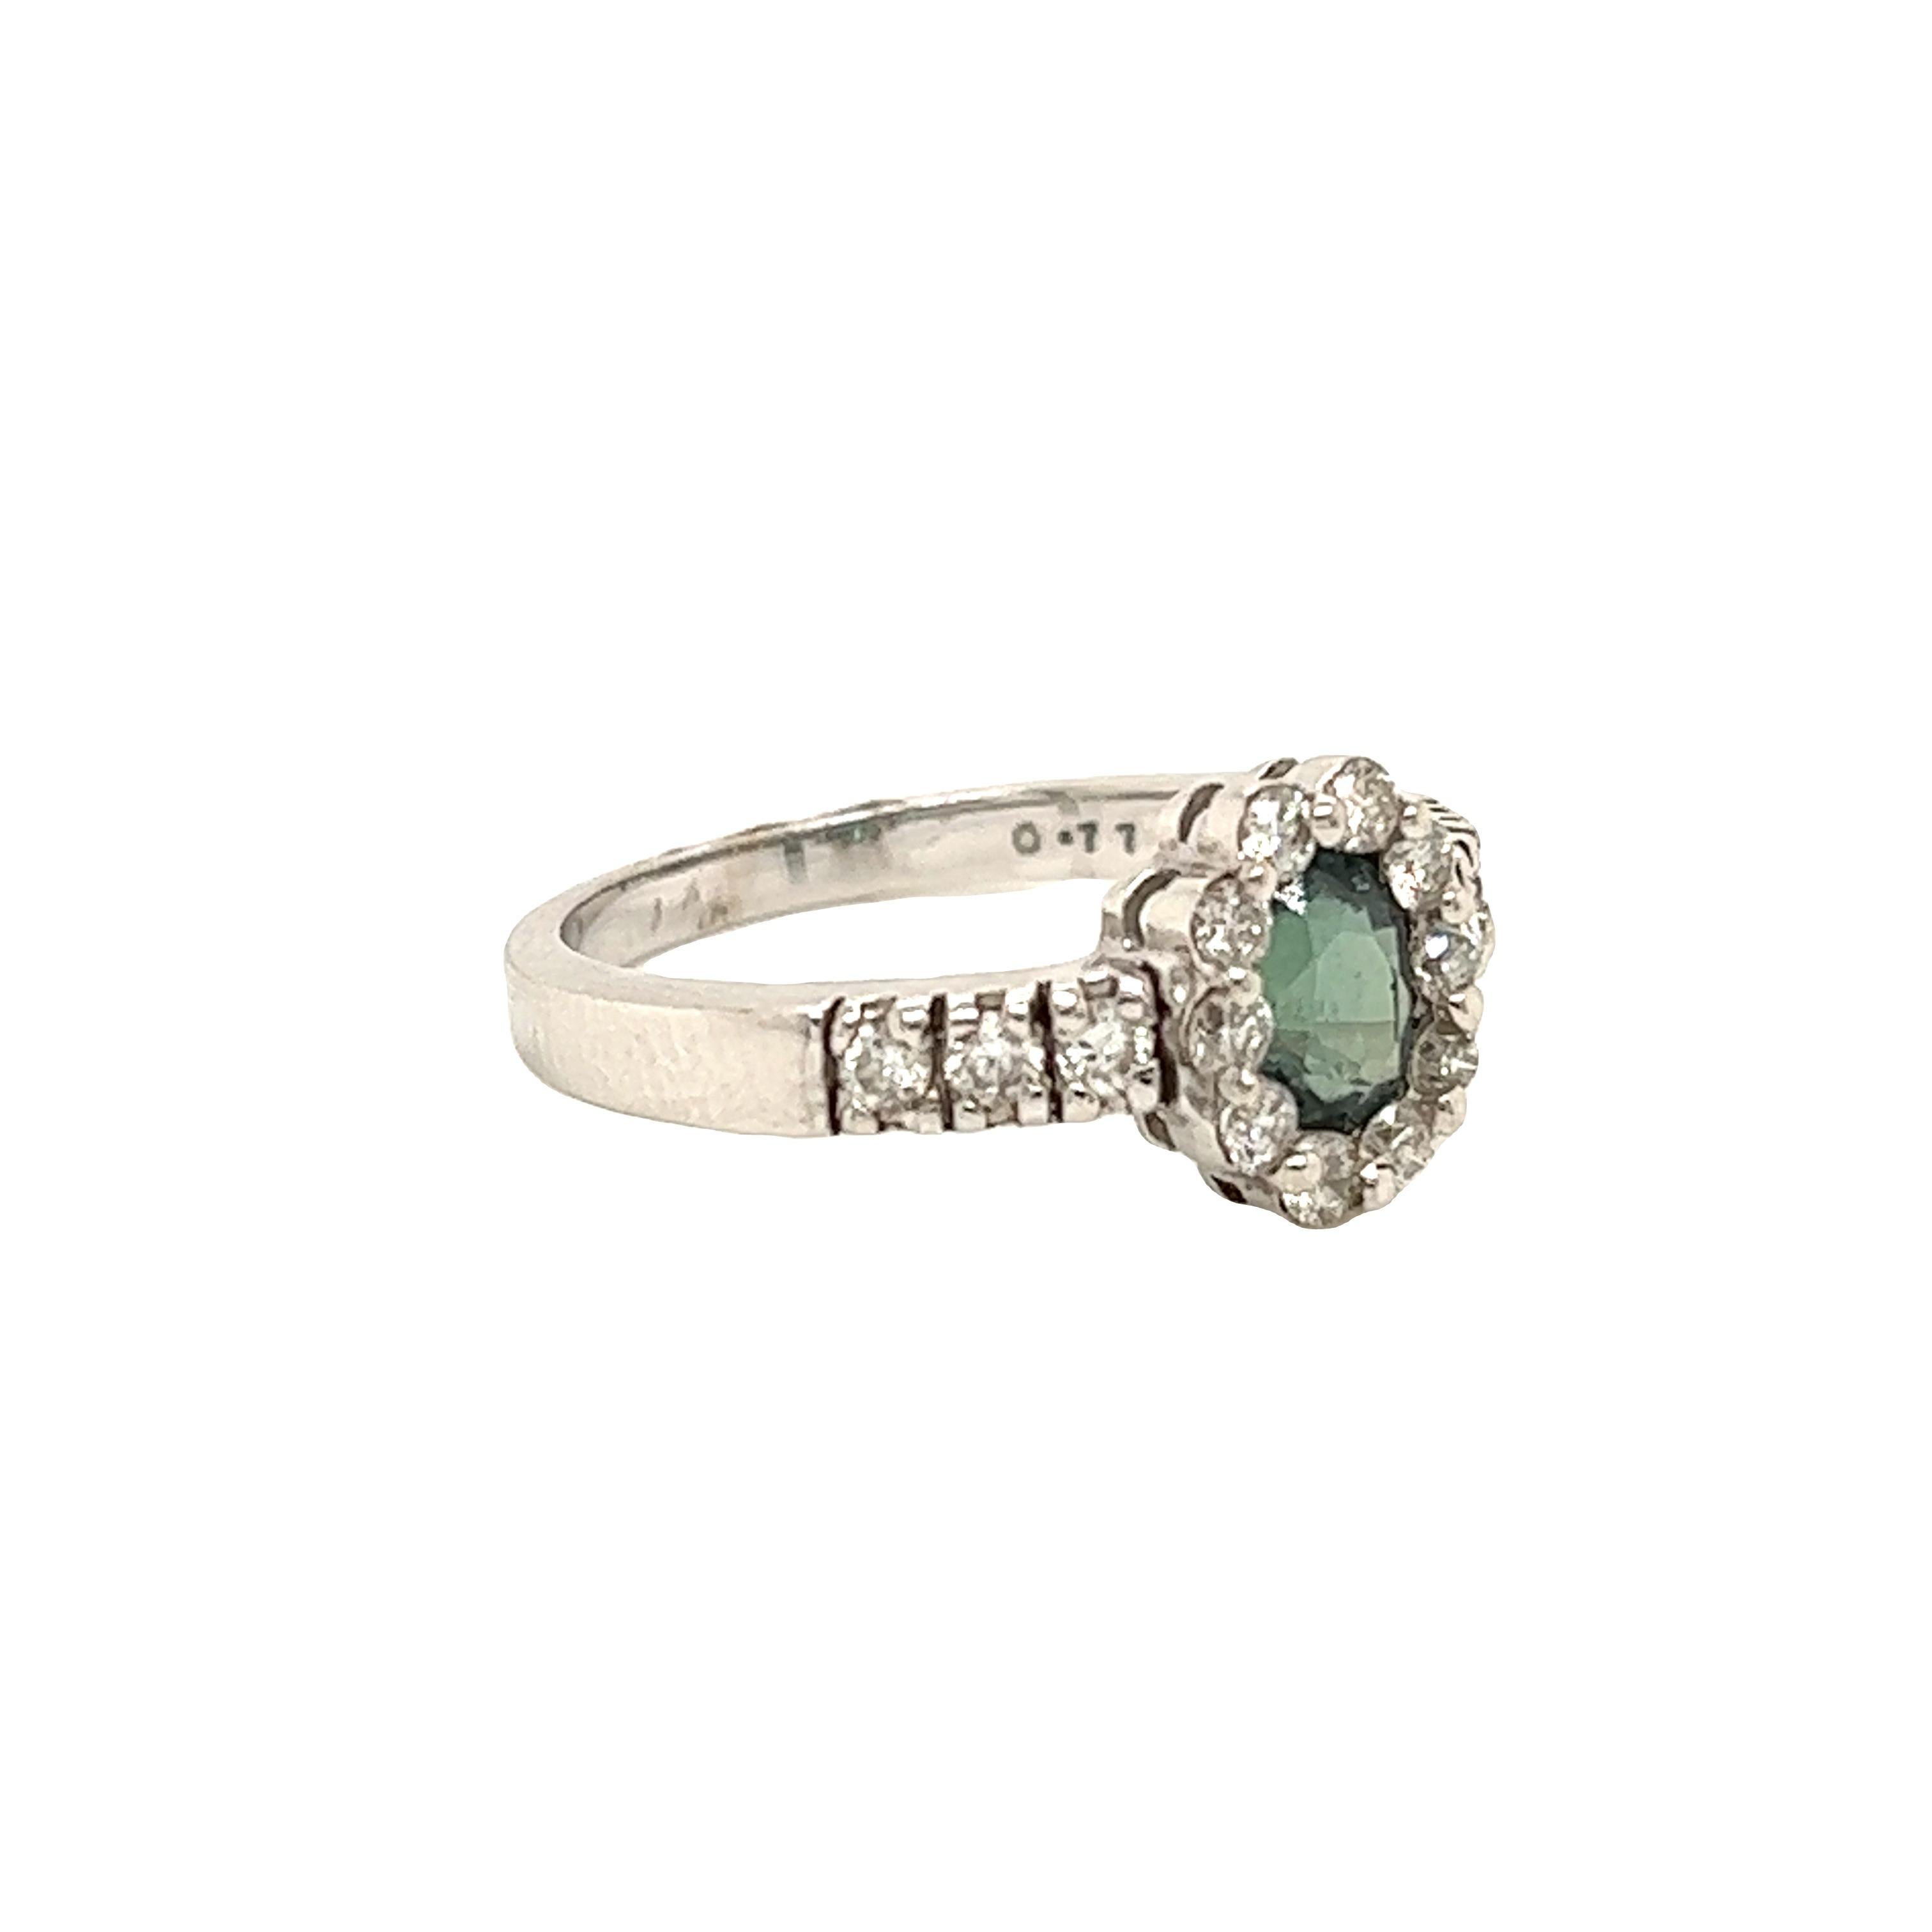 This is a gorgeous natural AAA quality oval Alexandrite surrounded by dainty diamonds that is set in a vintage White Gold setting. This ring features a natural 0.77 carat oval alexandrite that is surrounded by brilliant white diamonds. The ring is a